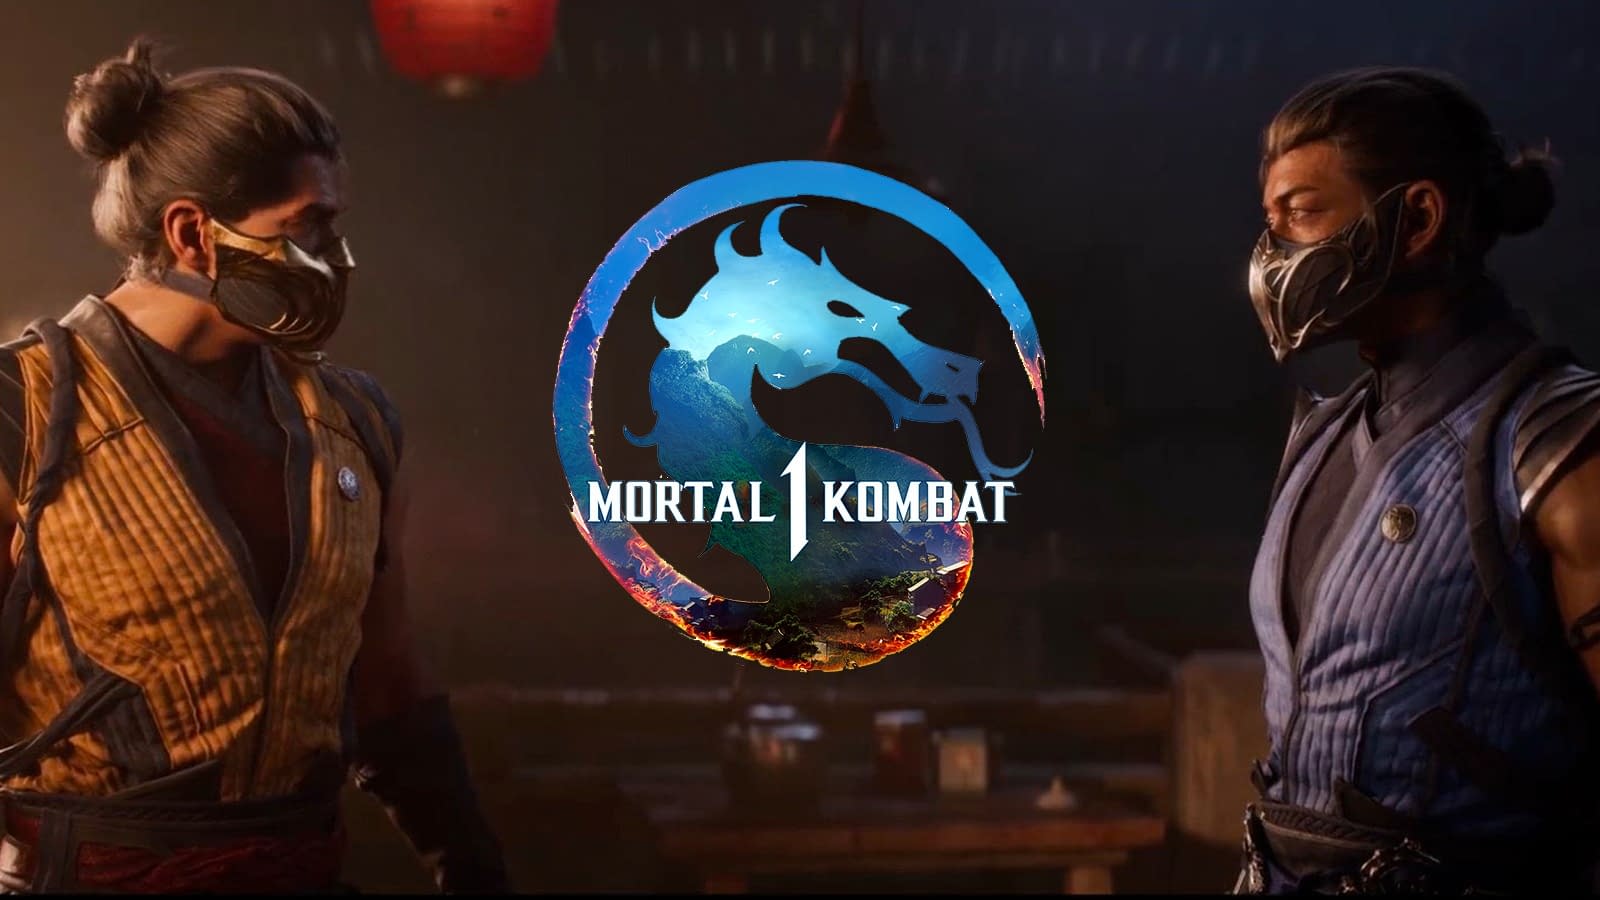 The official PC requirements for Mortal Kombat 1 are announced: 100 GB wants empty space